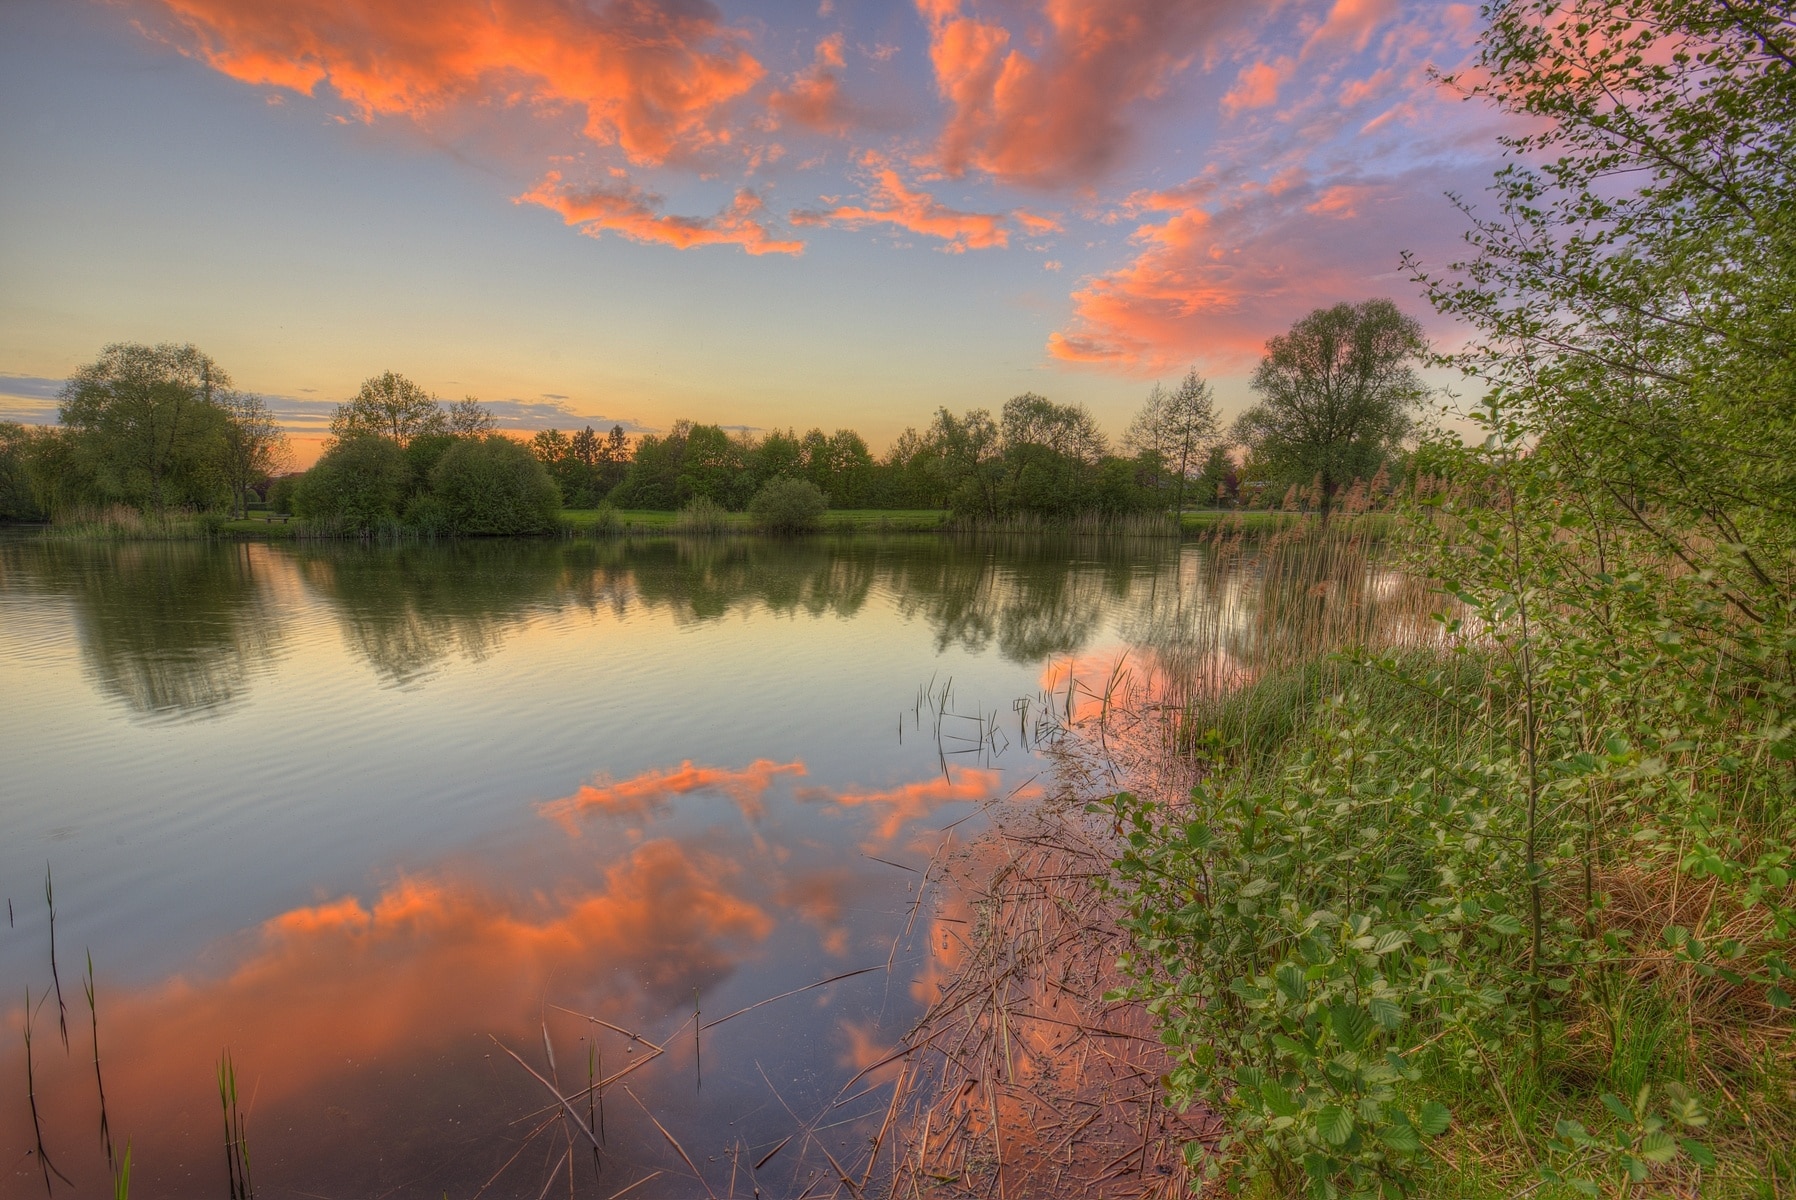 Sunset over the Thielenburger Lake in Dannenberg, in Lower Saxony (Germany).